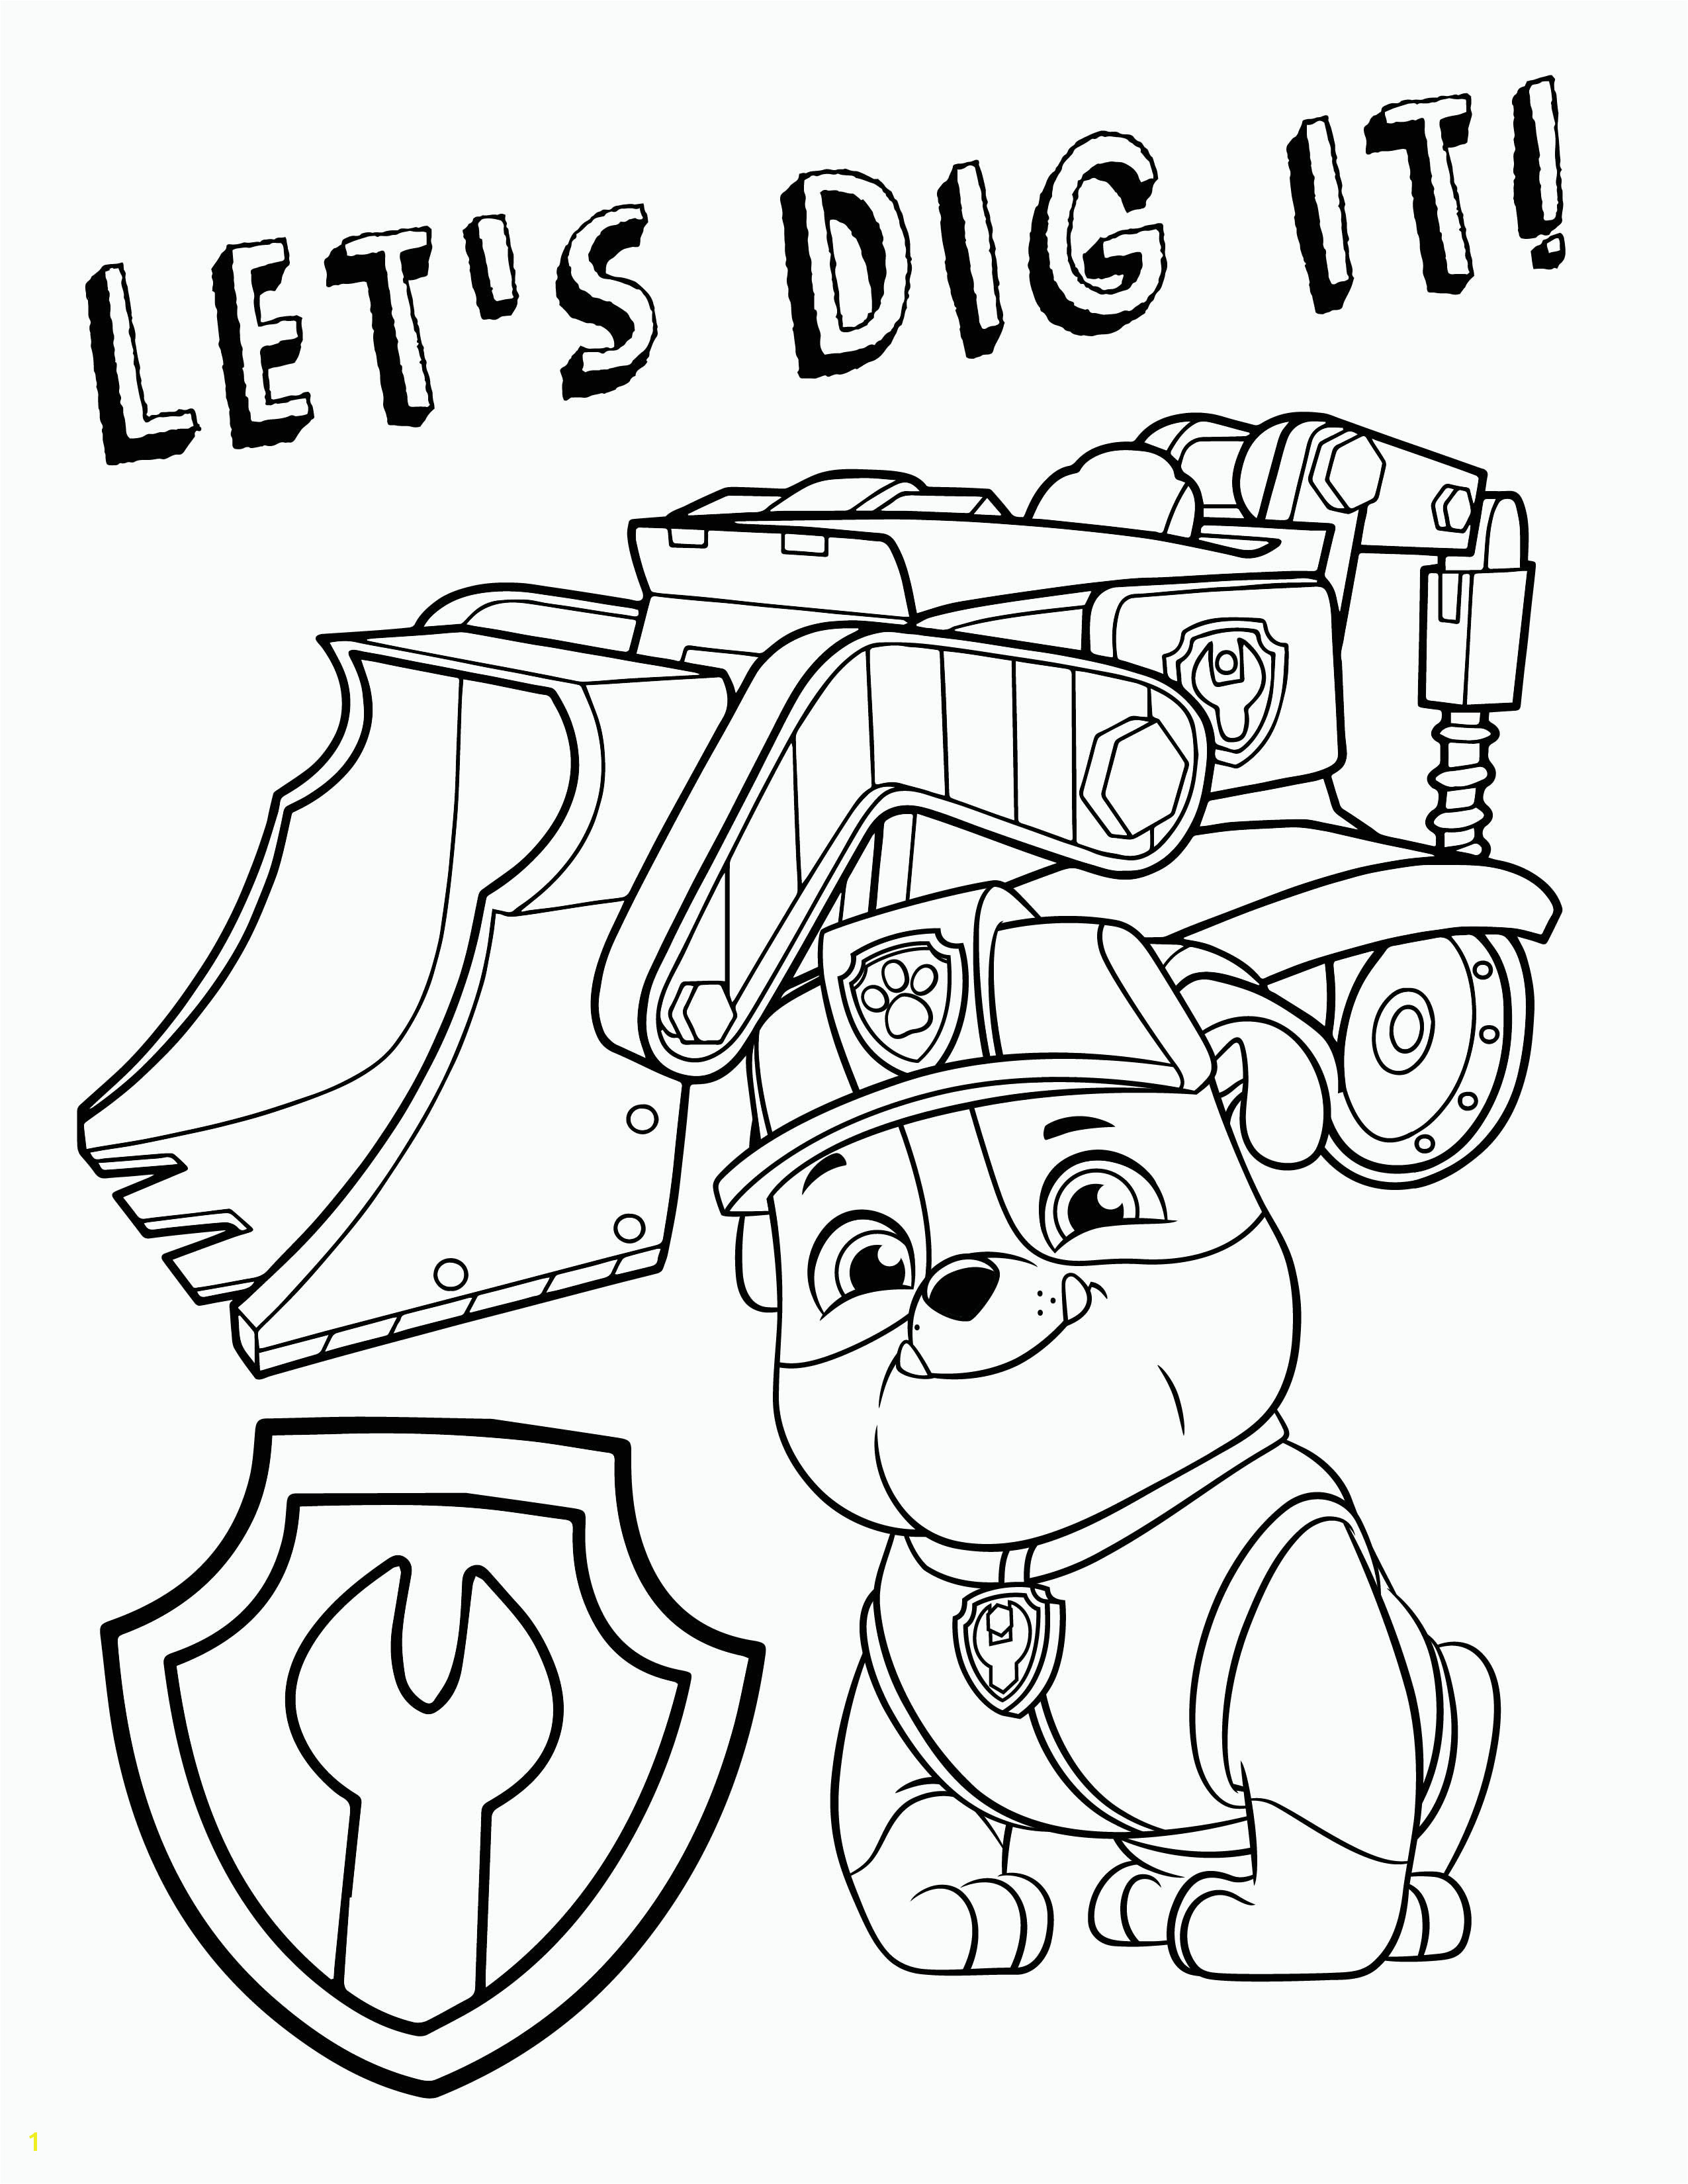 Paw Patrol Free Coloring Pages to Print Paw Patrol Coloring Pages – Free